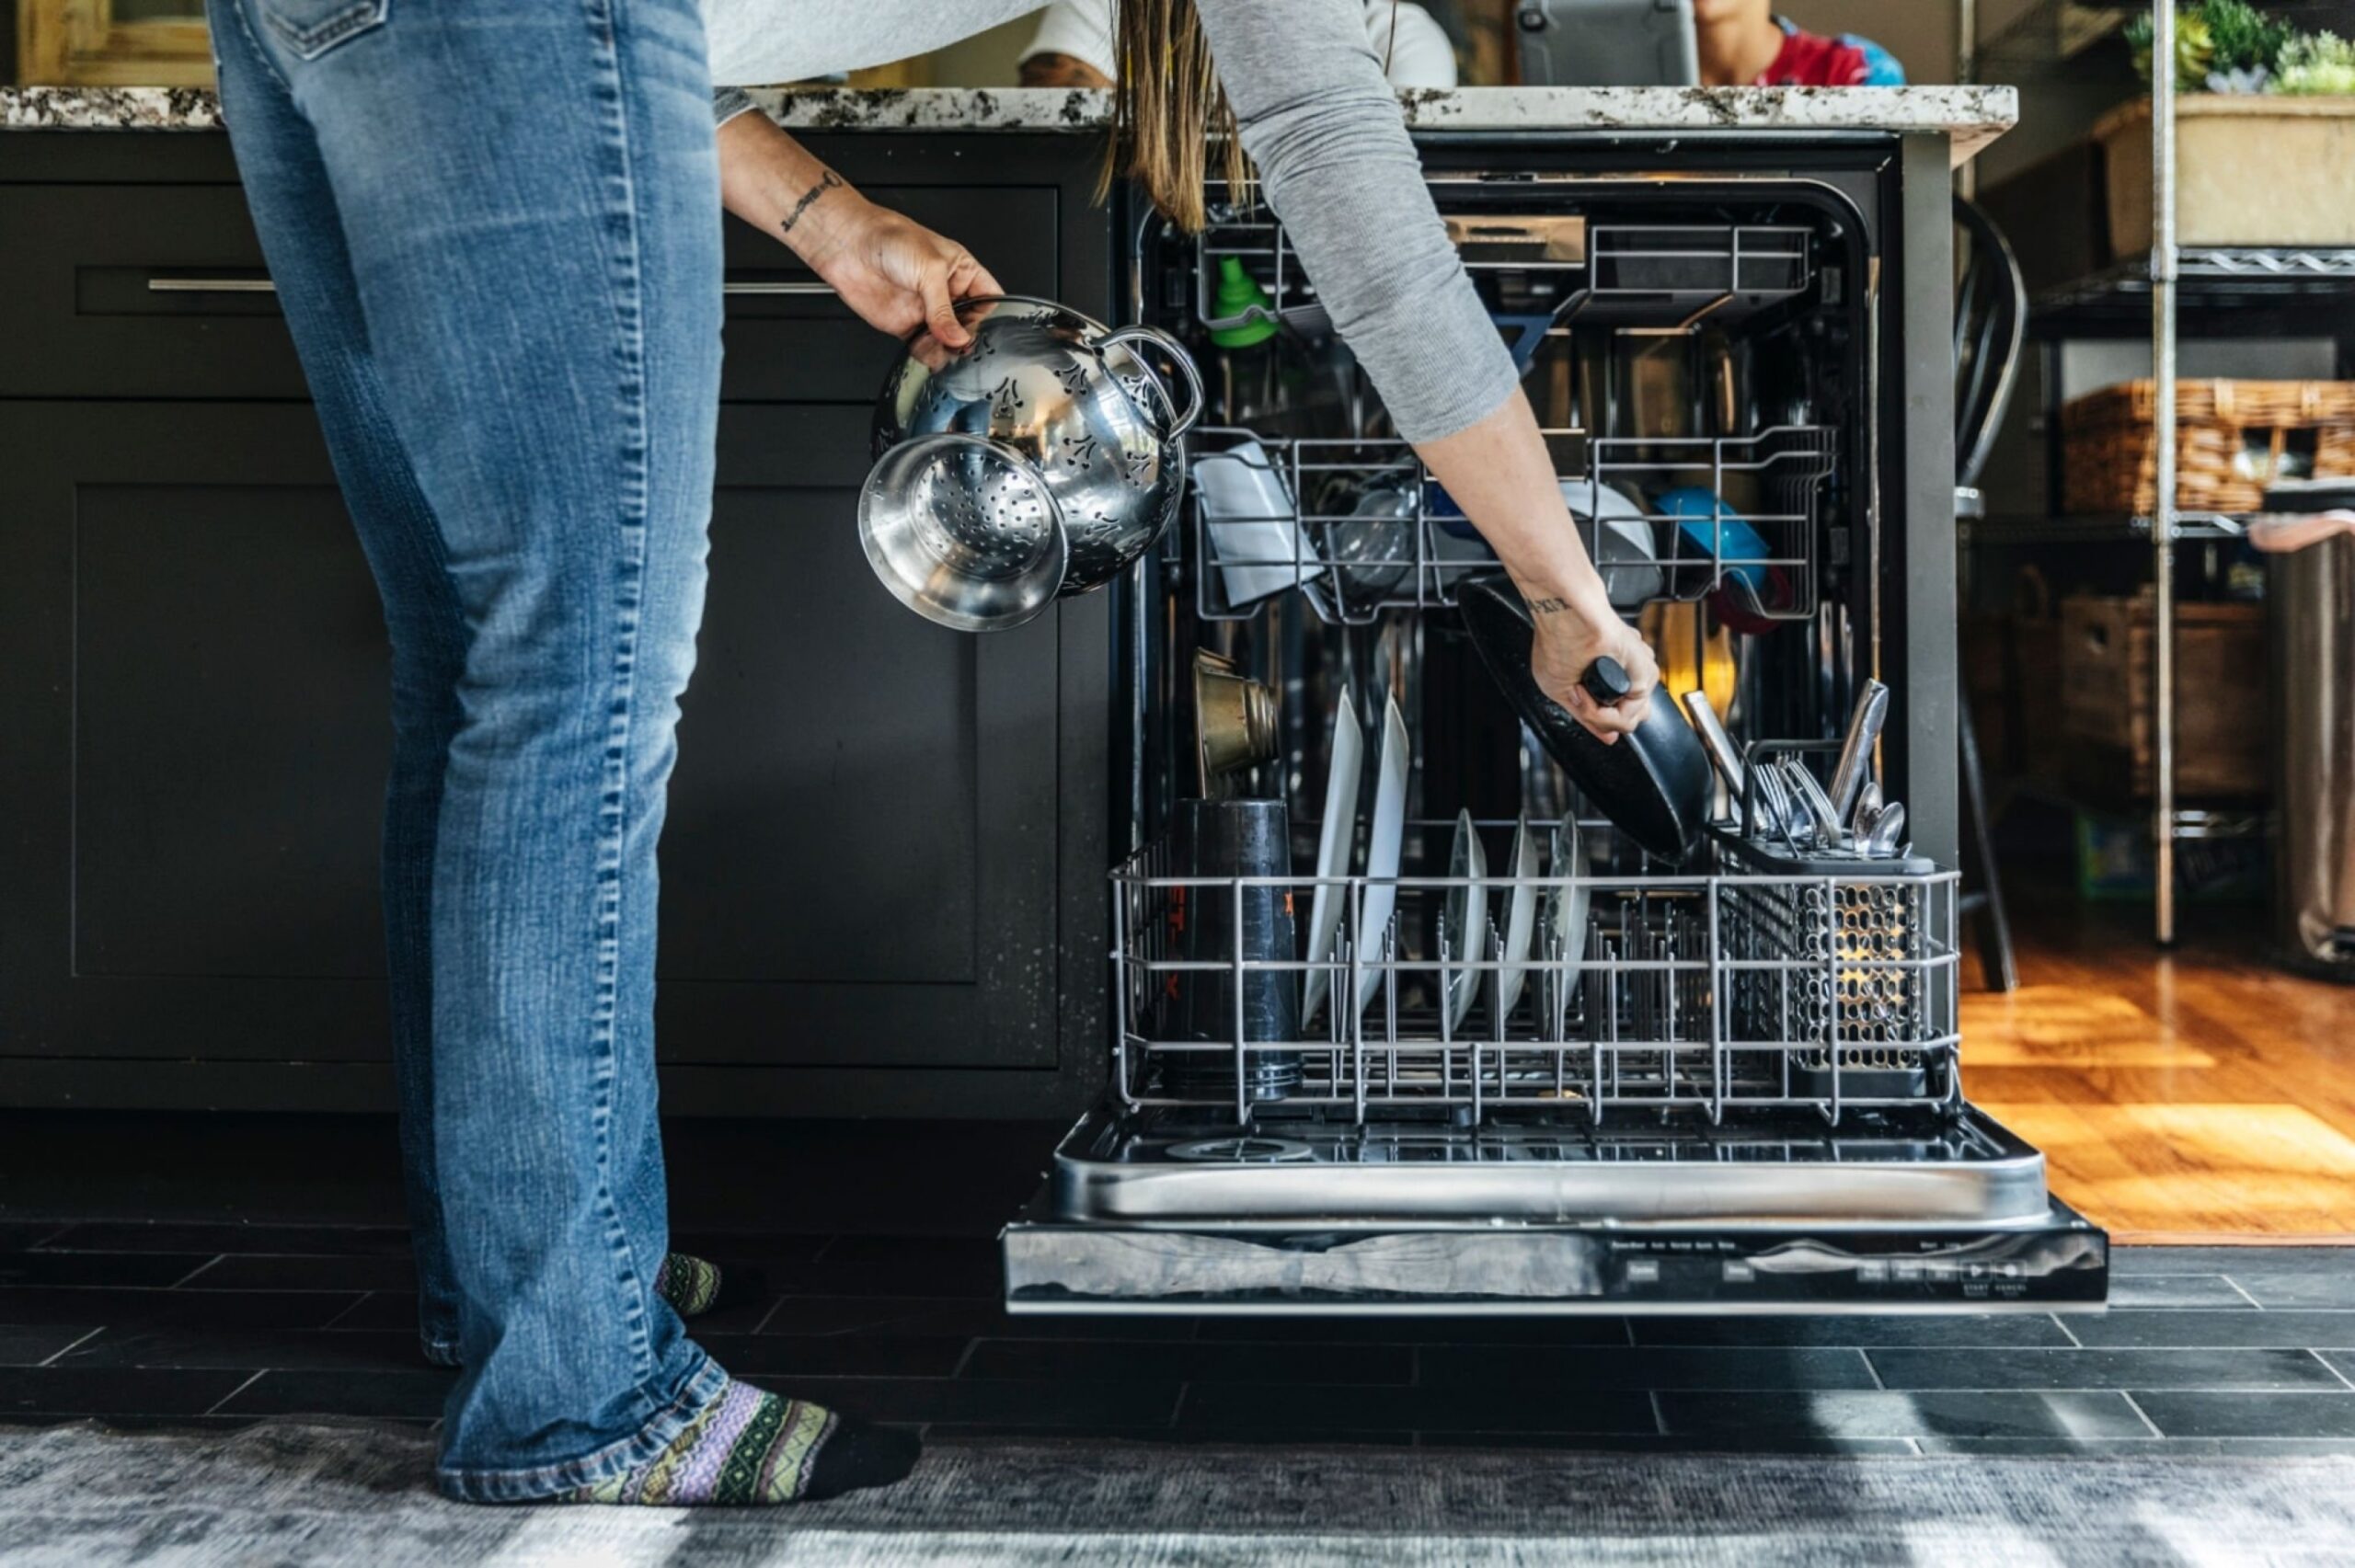 Woman arranging utensils in dishwasher at home